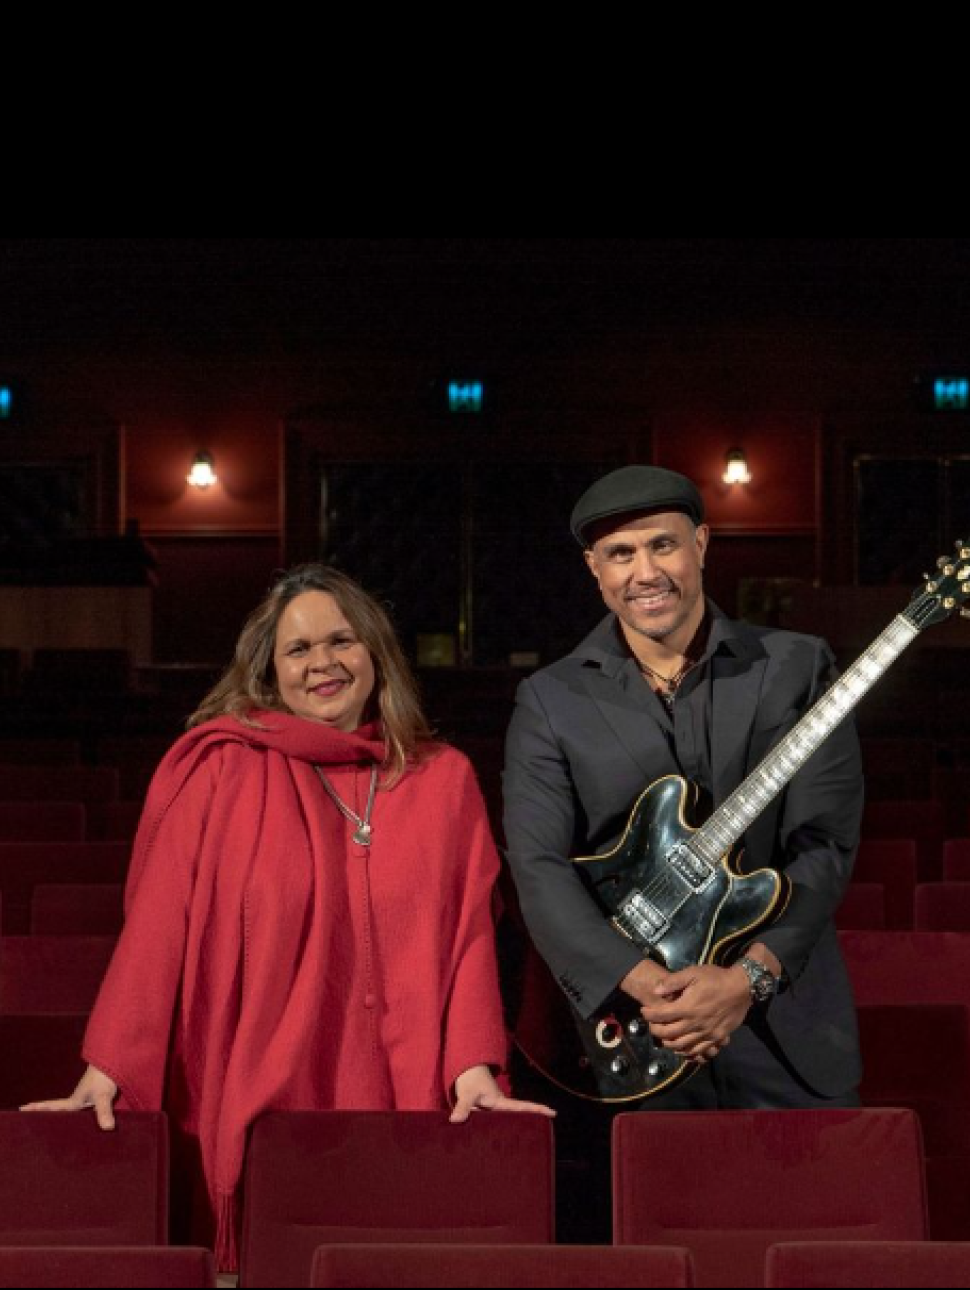 Musician's Gina Williams and Guy Ghouse stand among red velvet theatre chairs. Gina is wearing a red coat and silver necklace and Guy is wearing a black suit and hat, he is also holding a black guitar. Both are looking at the camera and smiling.  